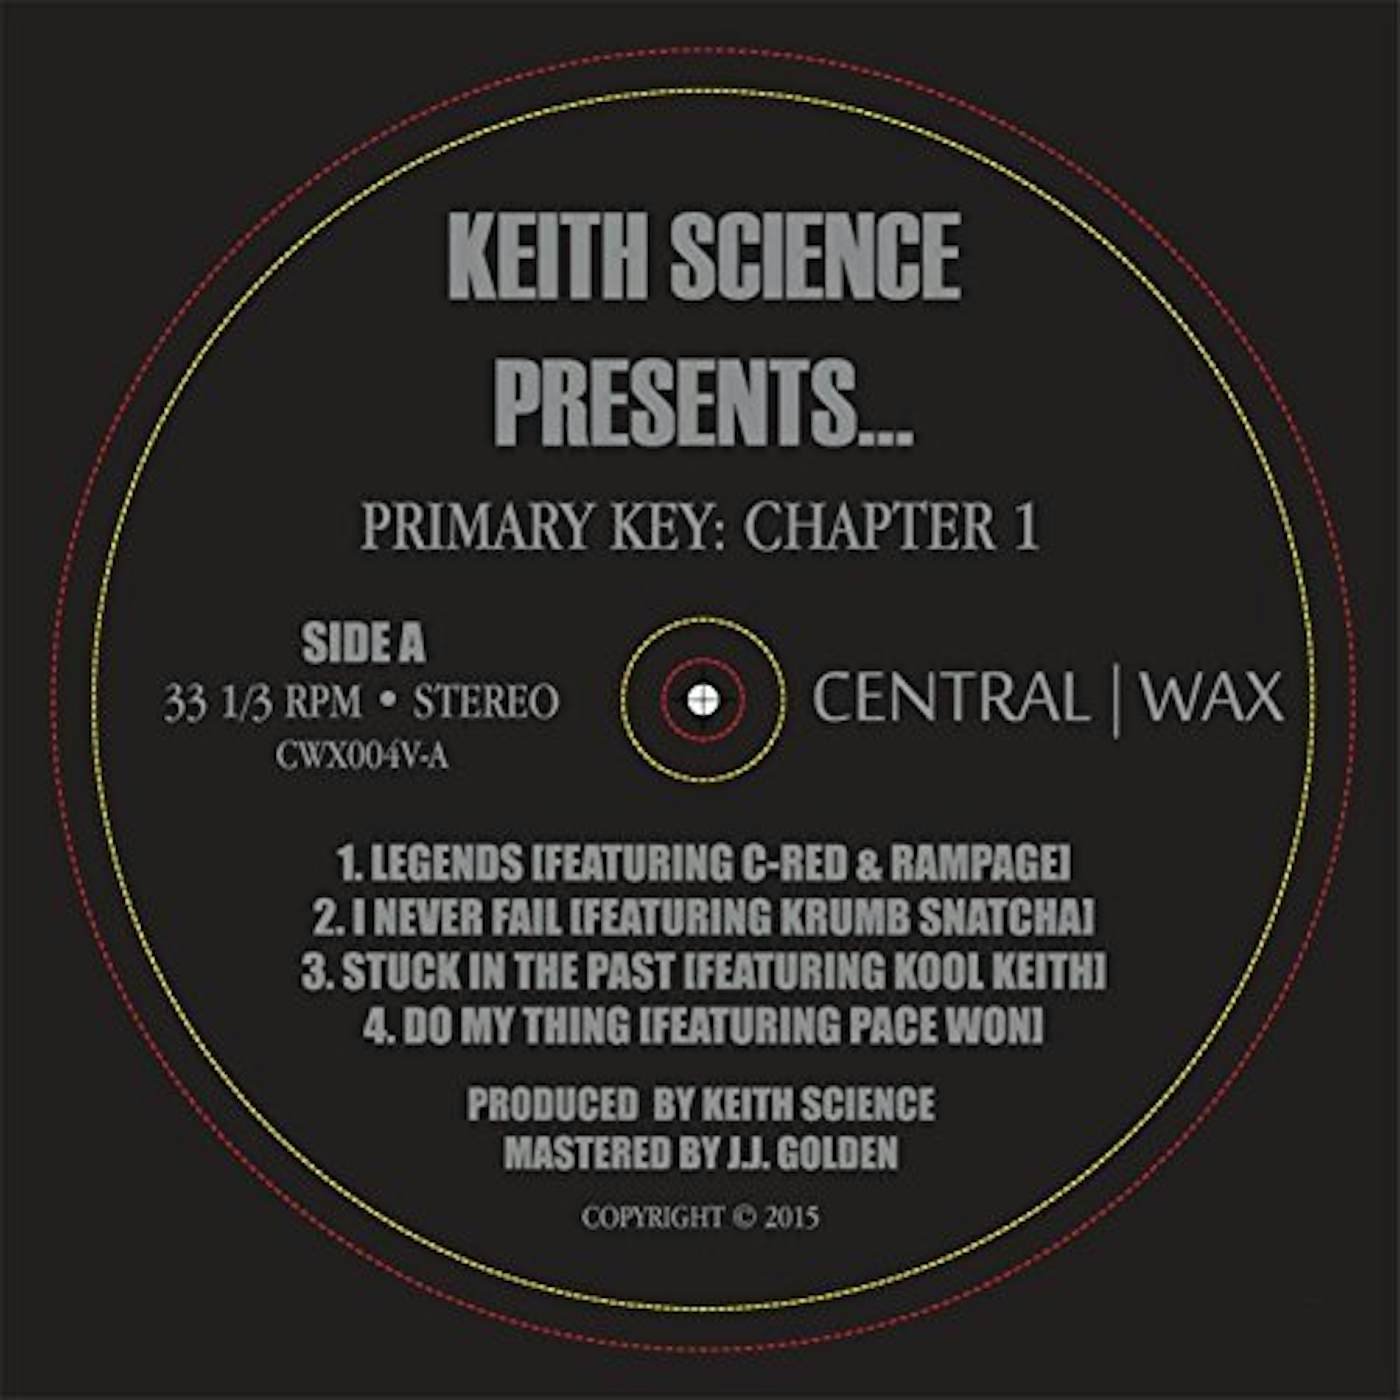 Keith Science PRIMARY KEY: CHAPTER 1 Vinyl Record